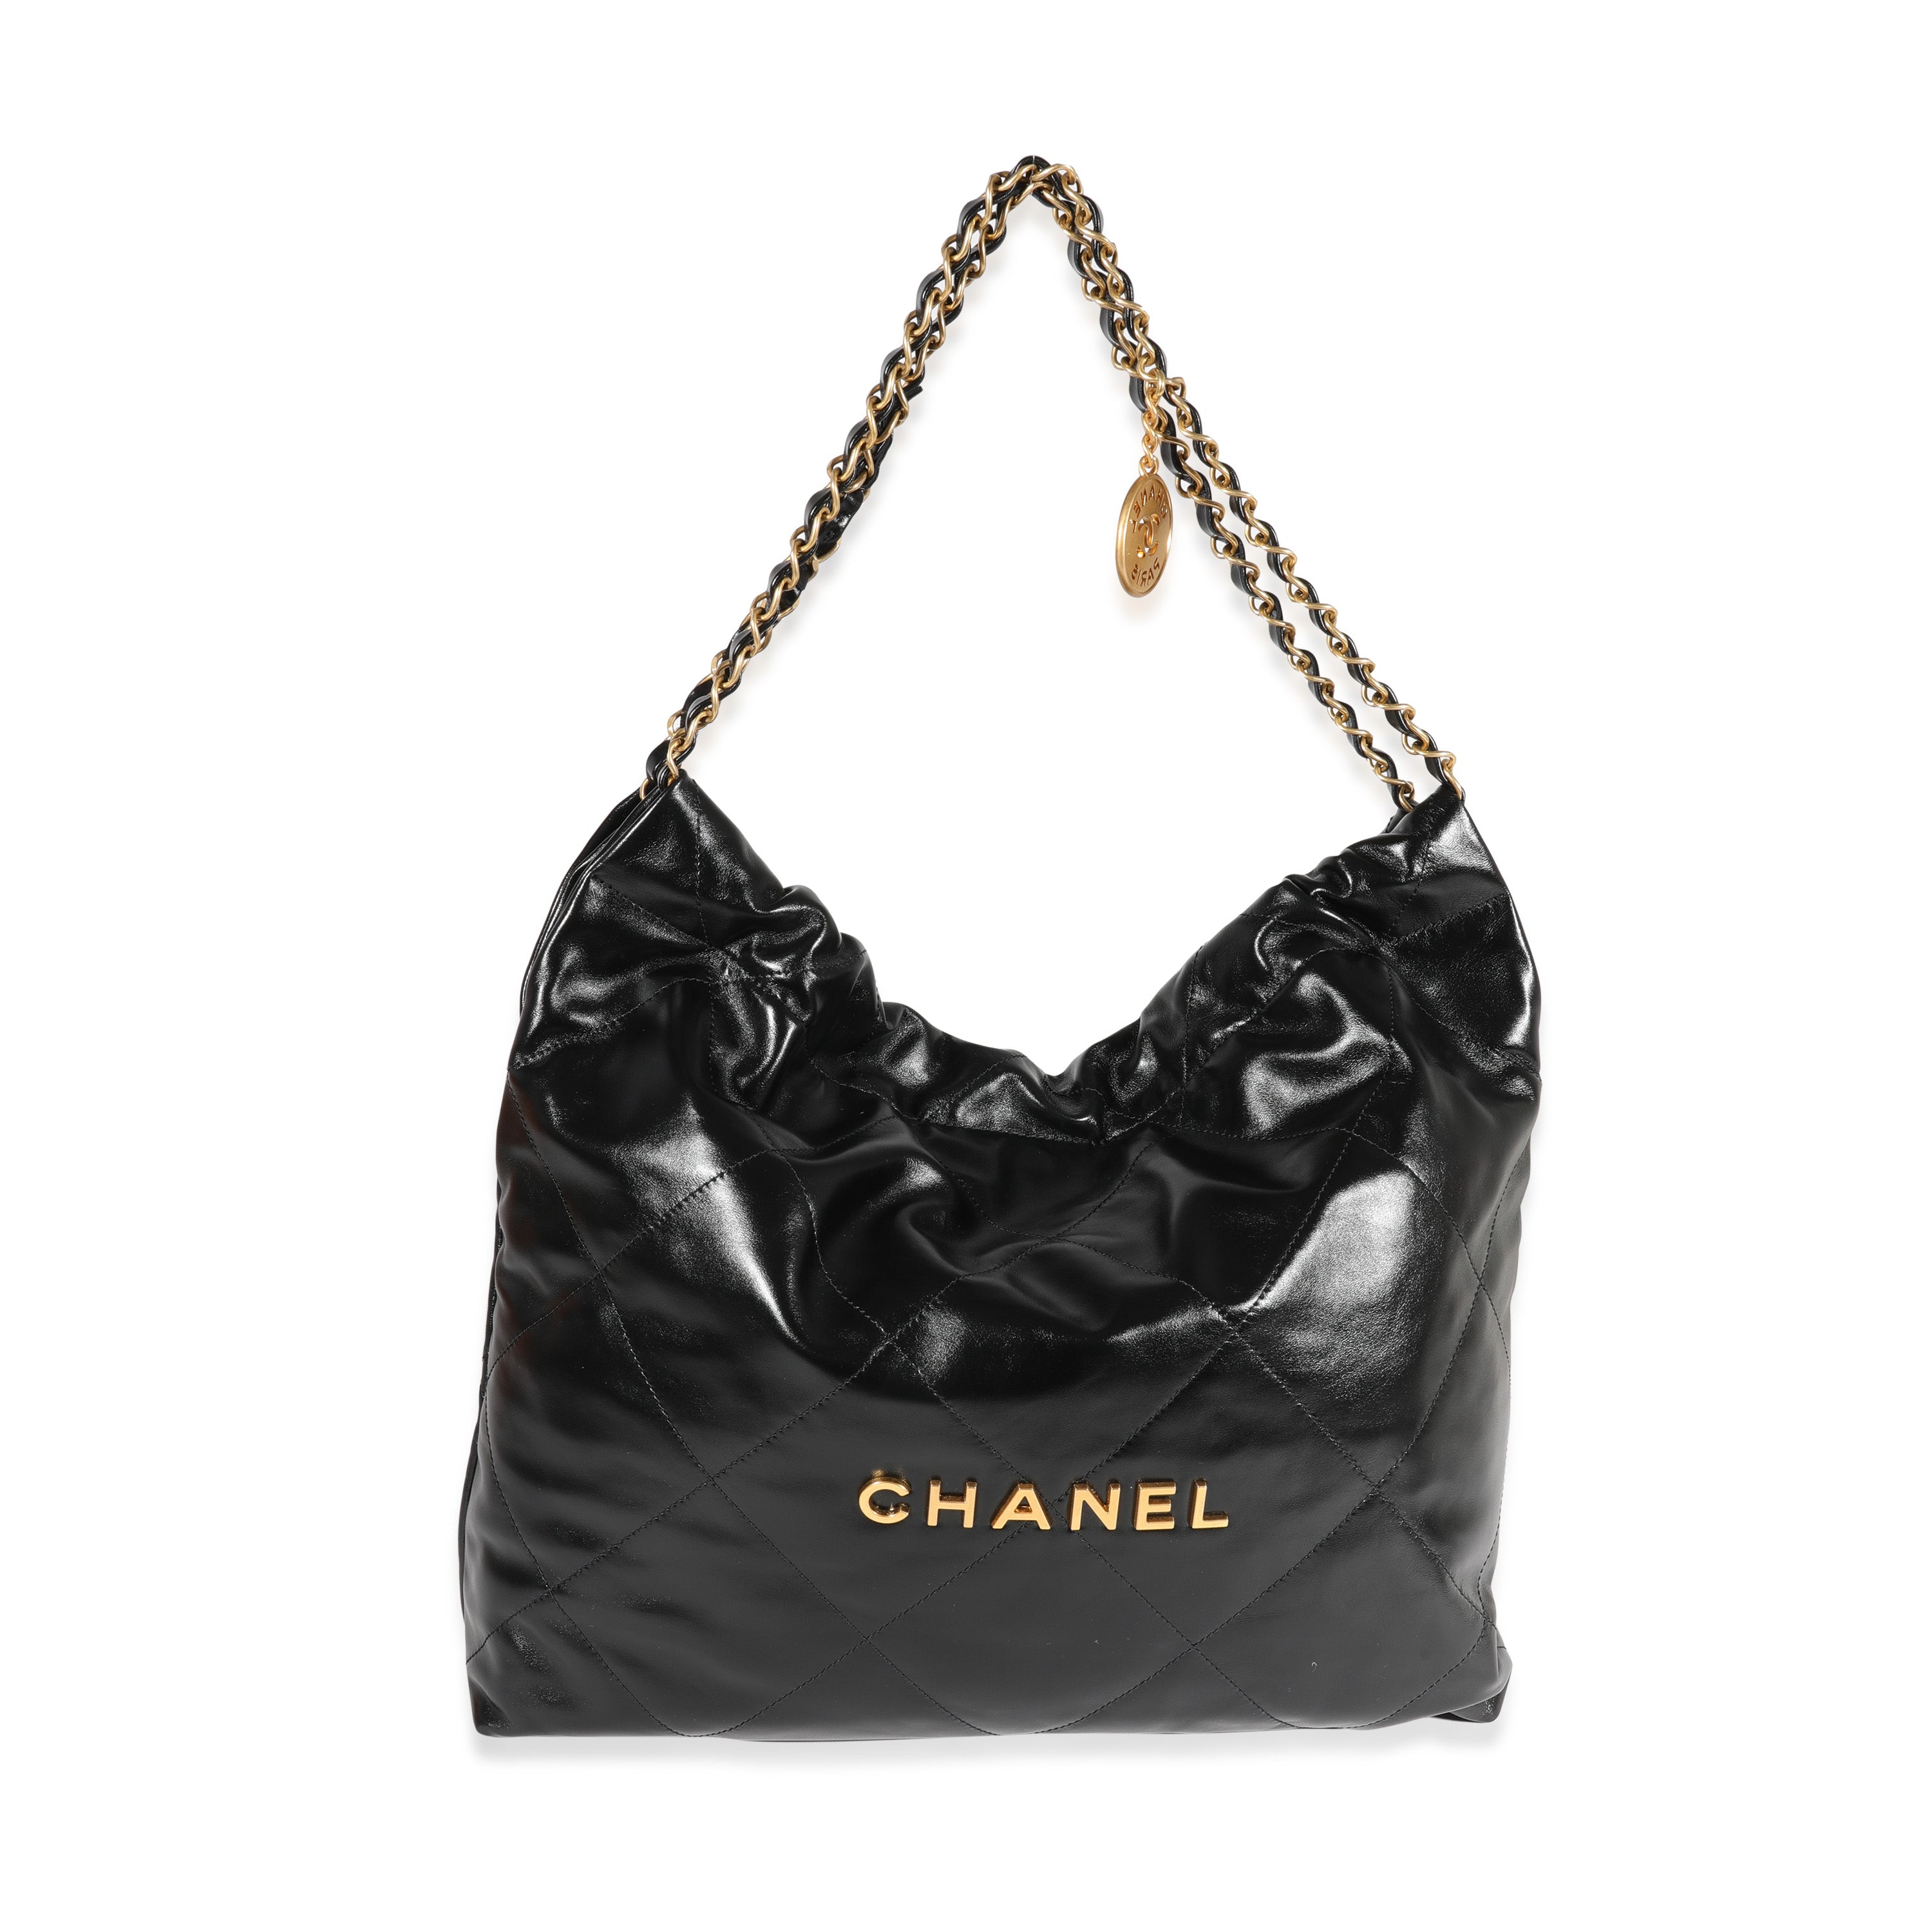 CHANEL 23A Mini 22 Black Shiny Calf Skin Bag Gold Hardware – AYAINLOVE  CURATED LUXURIES